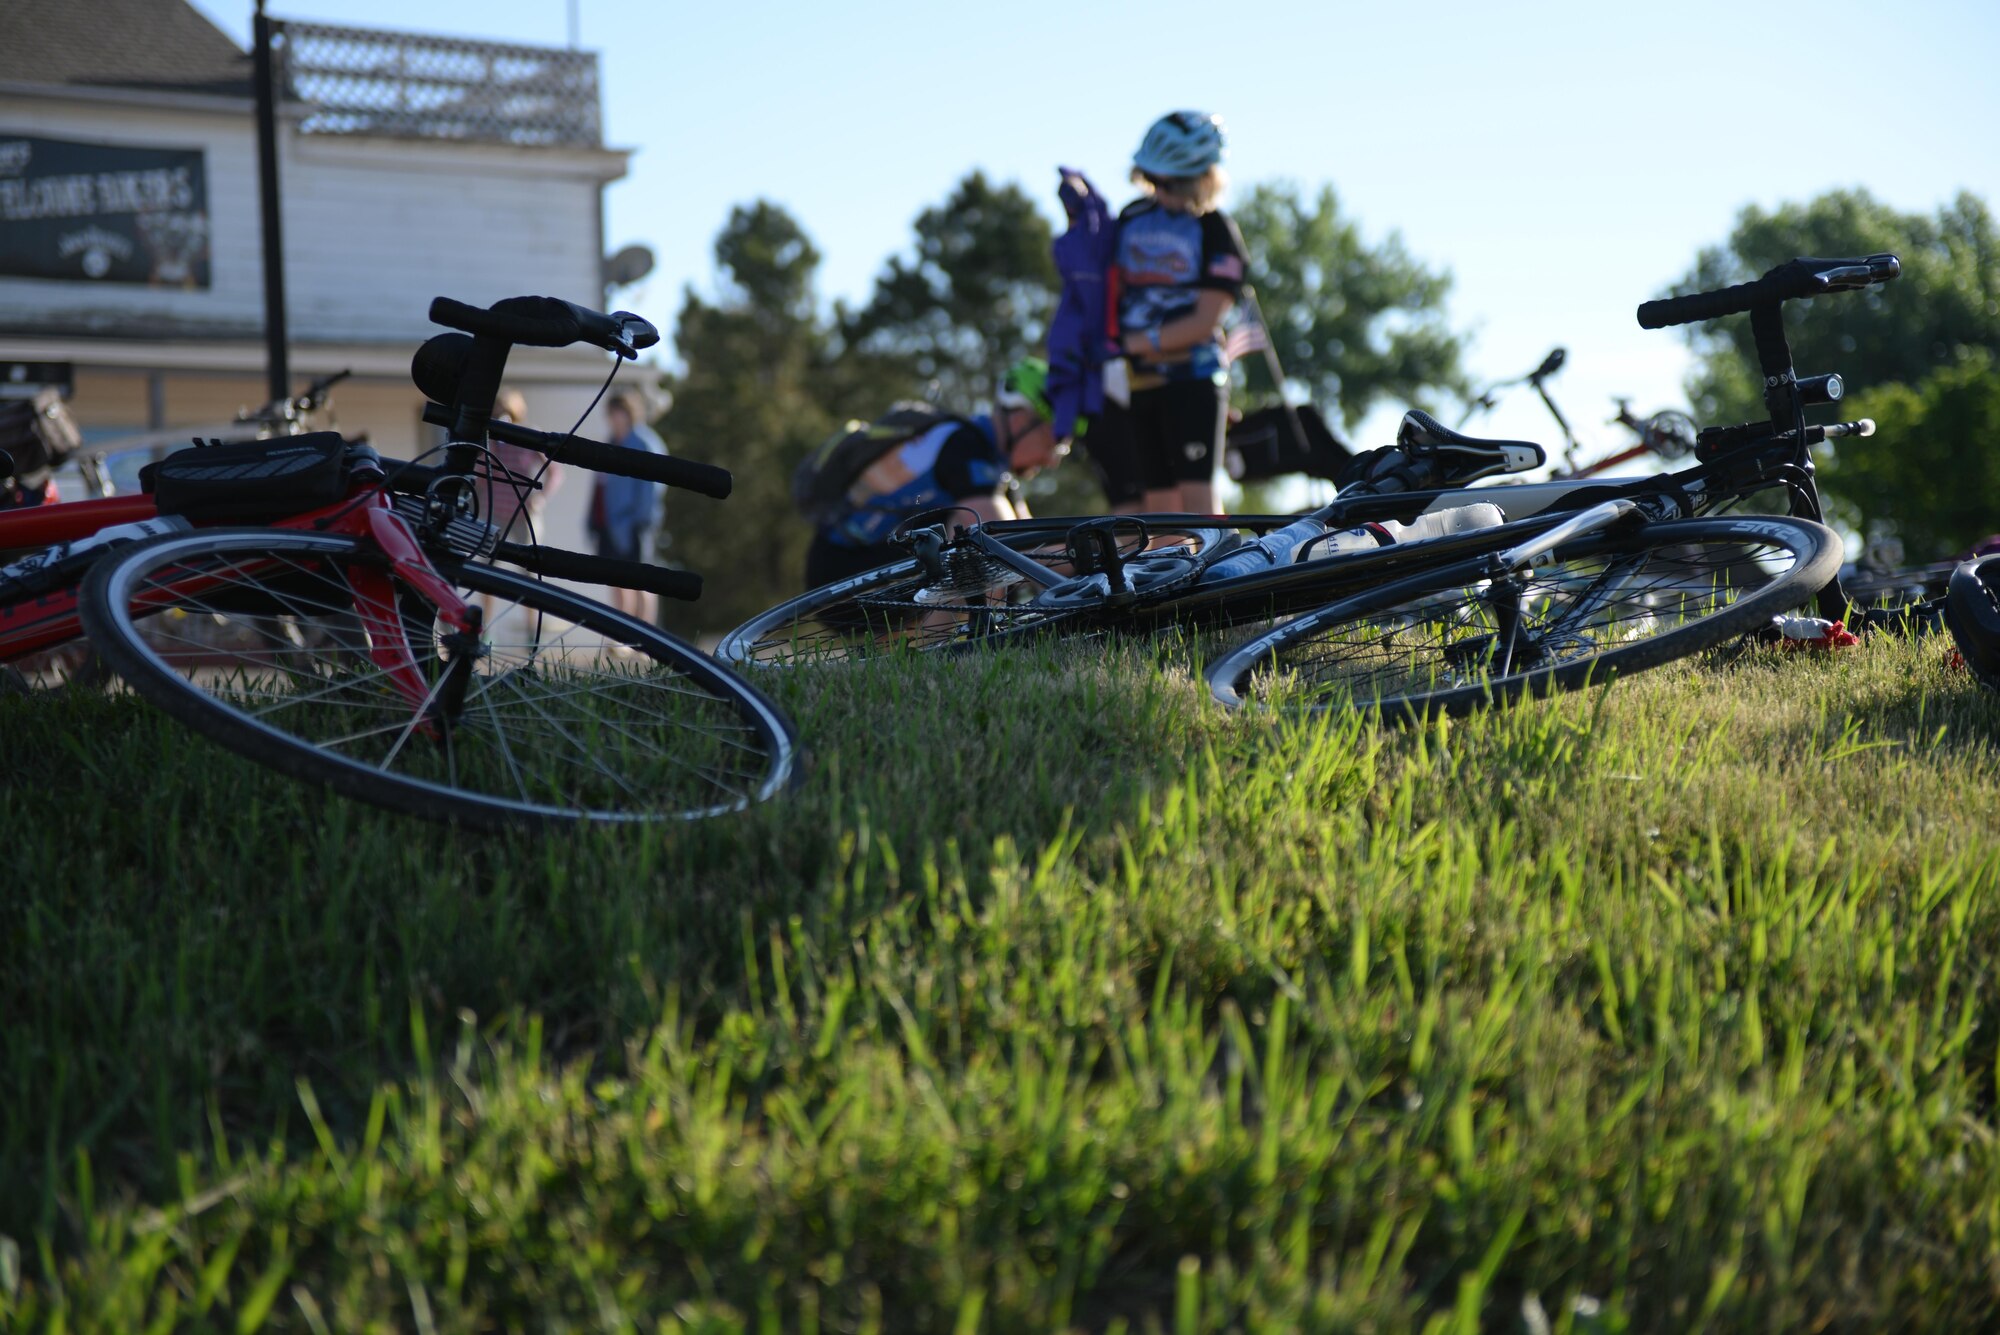 Riders take a break from the Ride Across South Dakota bike tour in Caputa, S.D., June 4, 2017. The RASDAK entails 516 miles, but the first day encompasses a gradual elevation change of 2000 miles in 74 miles starting from Rapid City to the Badlands National Park. (U.S. Air Force photo by Airman Nicolas Z. Erwin)